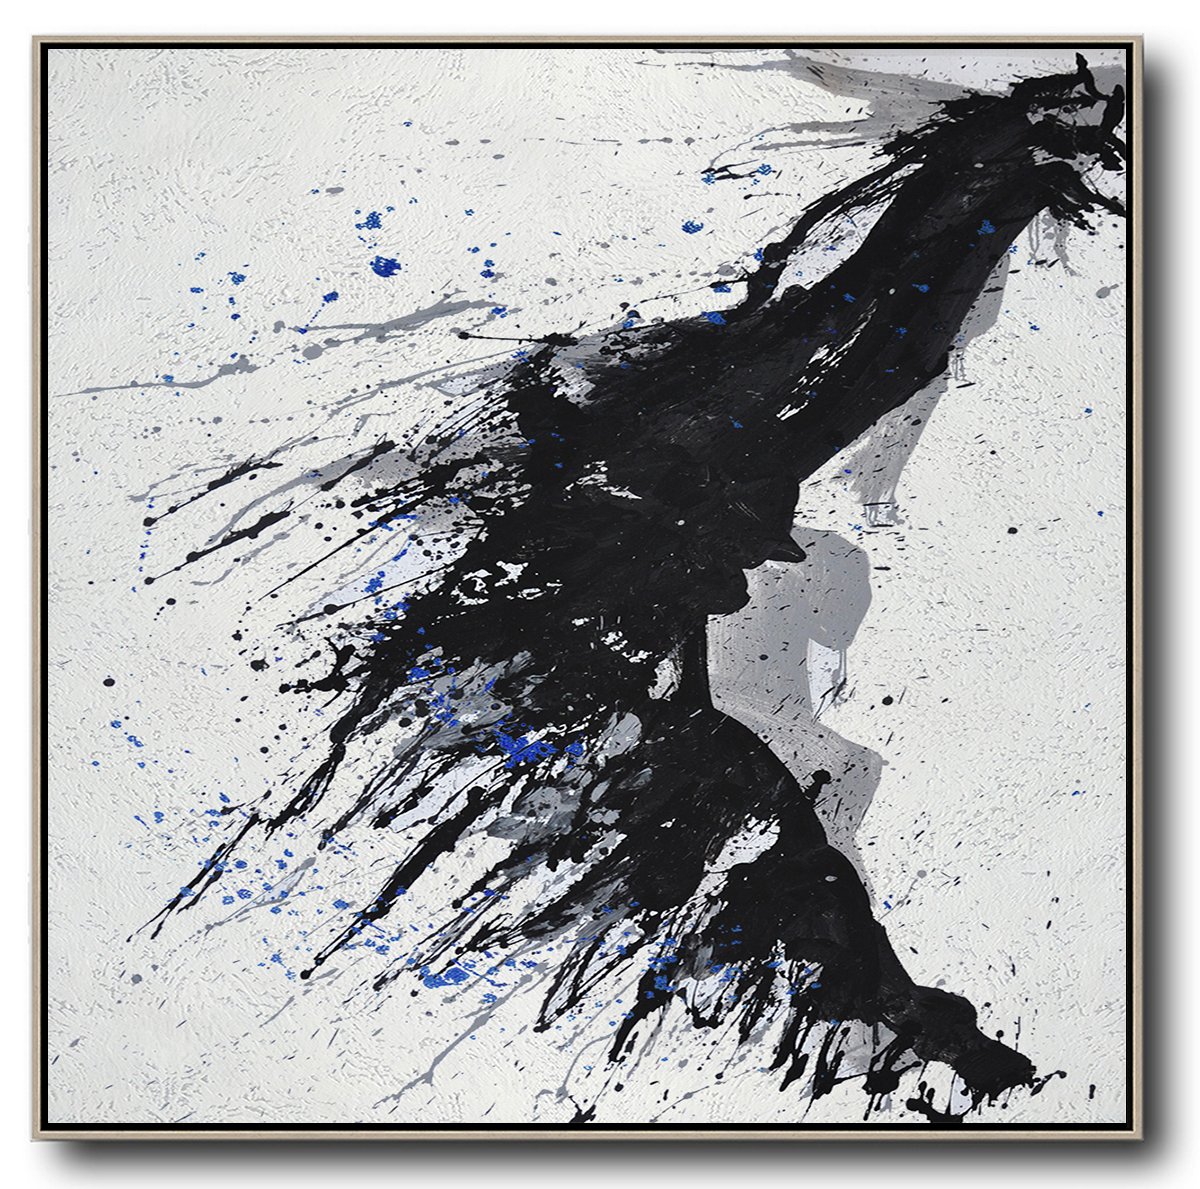 Hand-Painted Minimalist Drip Painting On Canvas, Black, White, Grey, Blue - Long Abstract Art Foyer Large